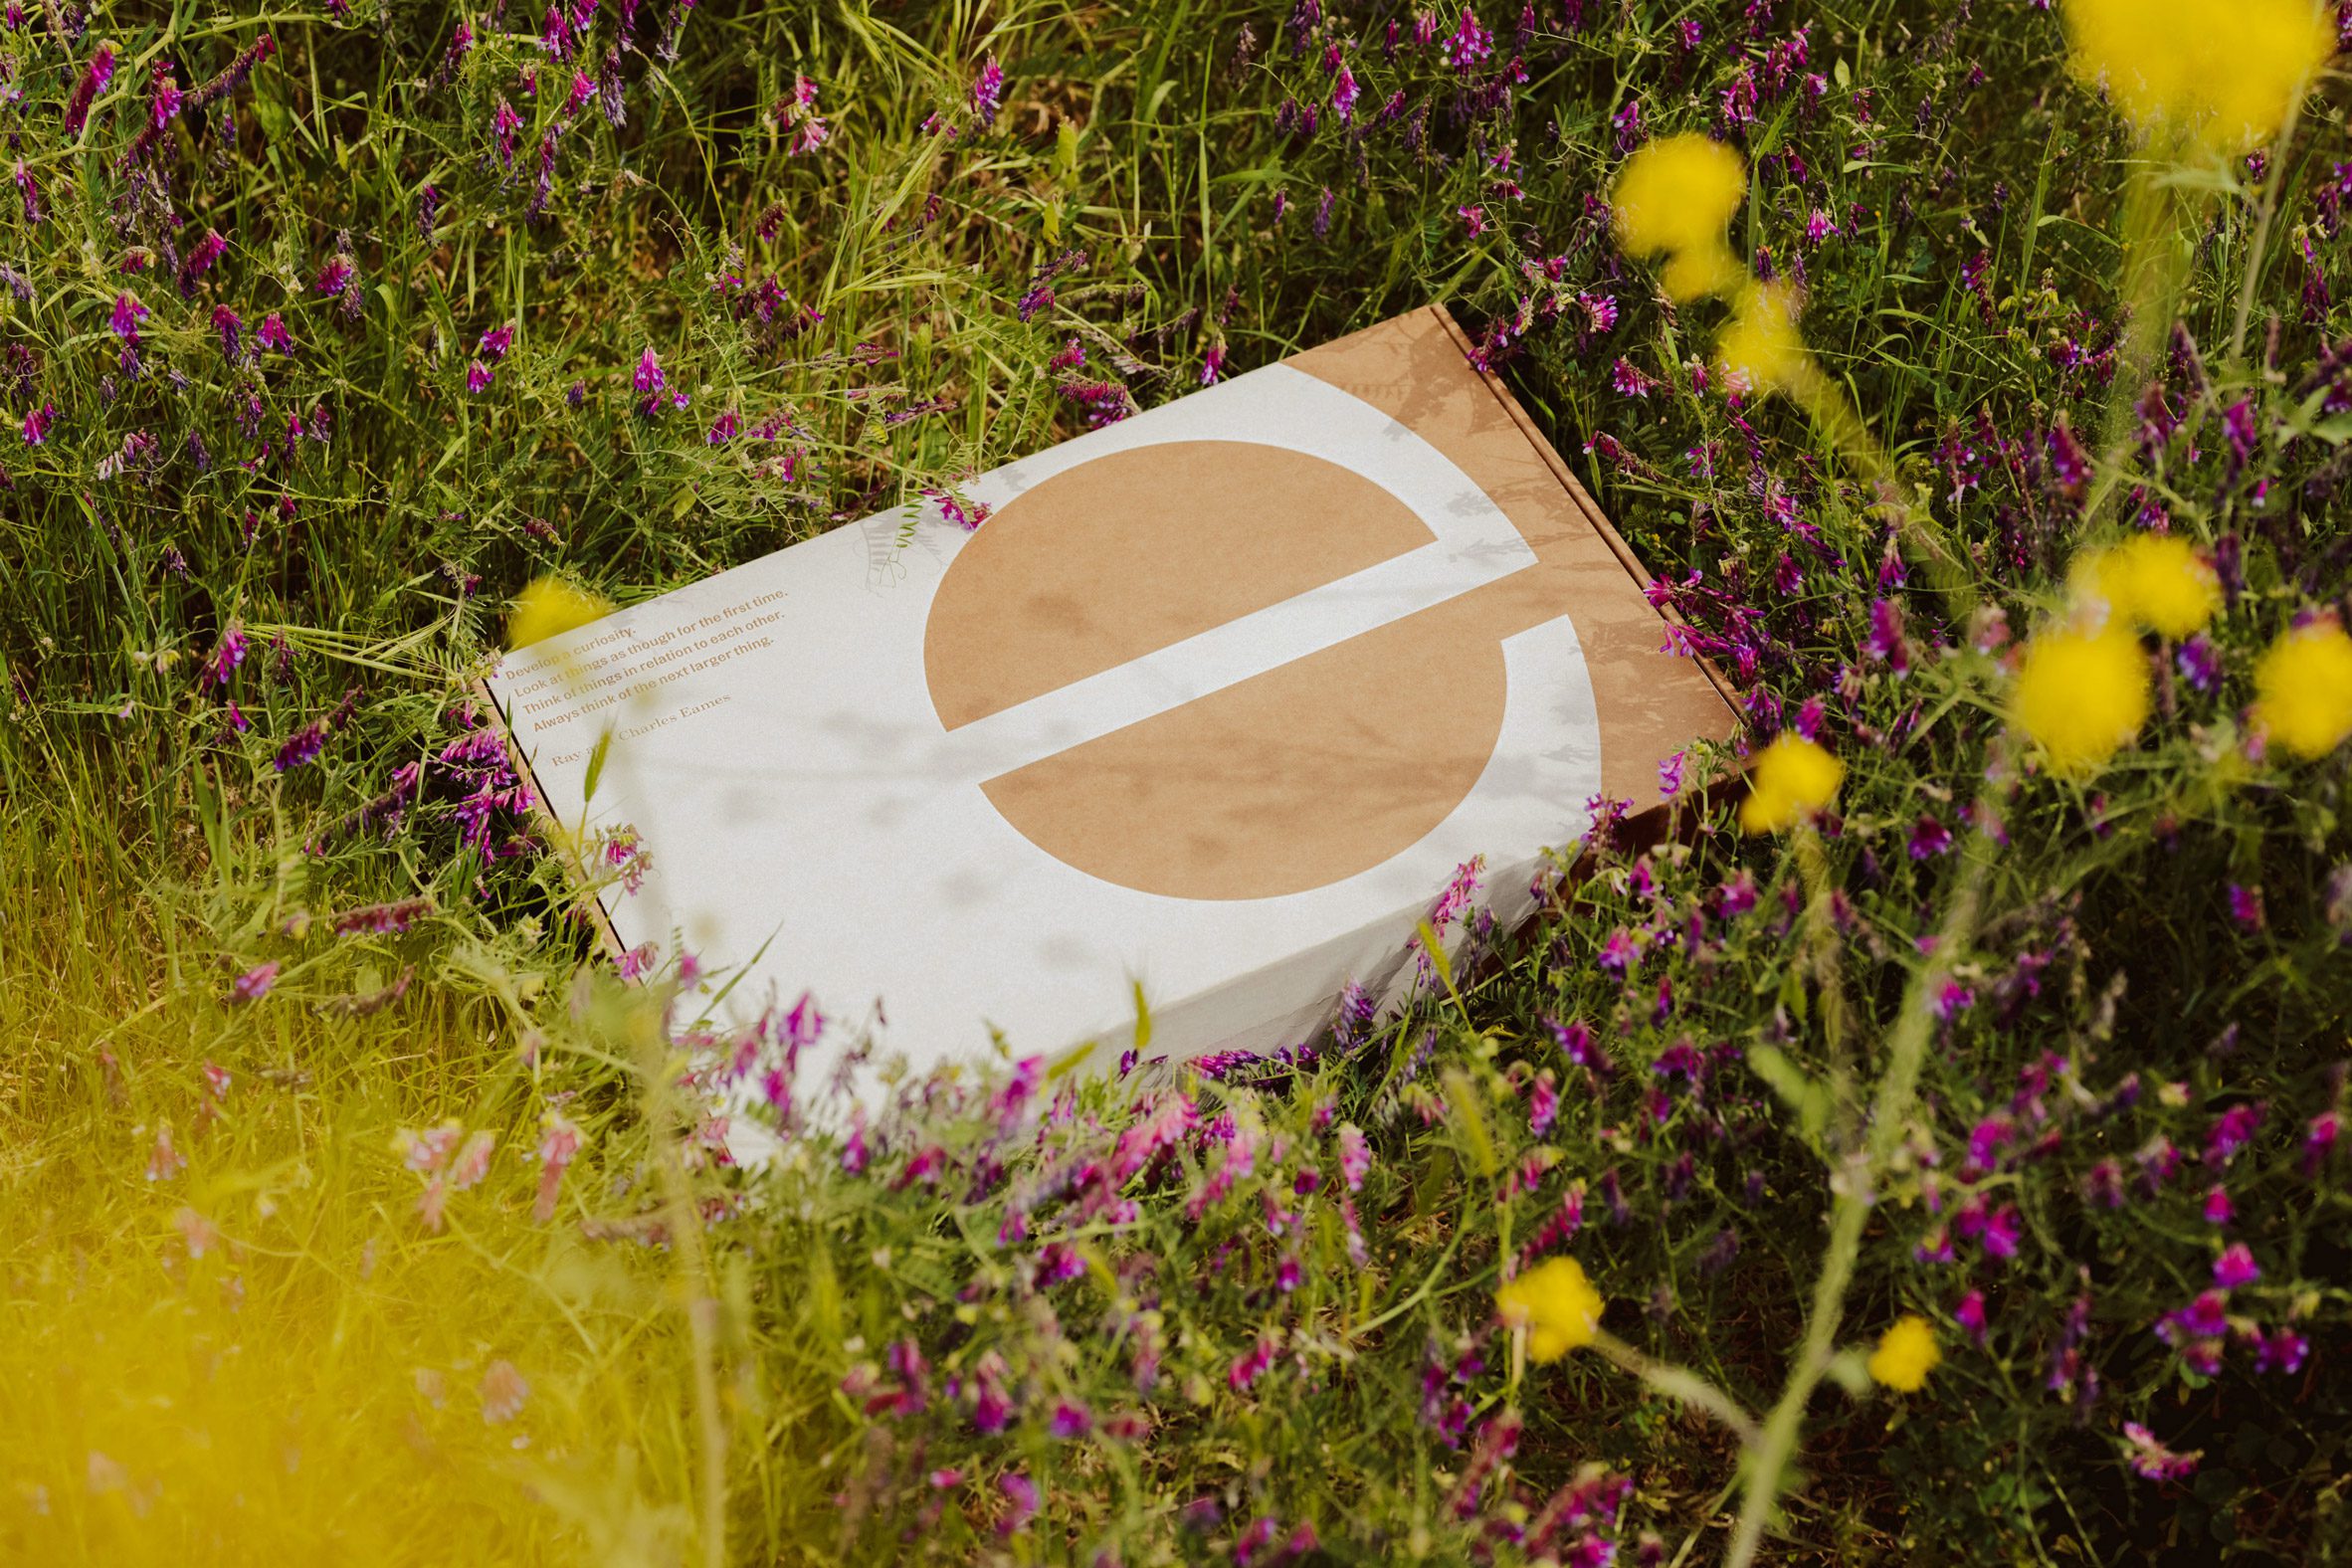 A branding kit in the grass with a large e